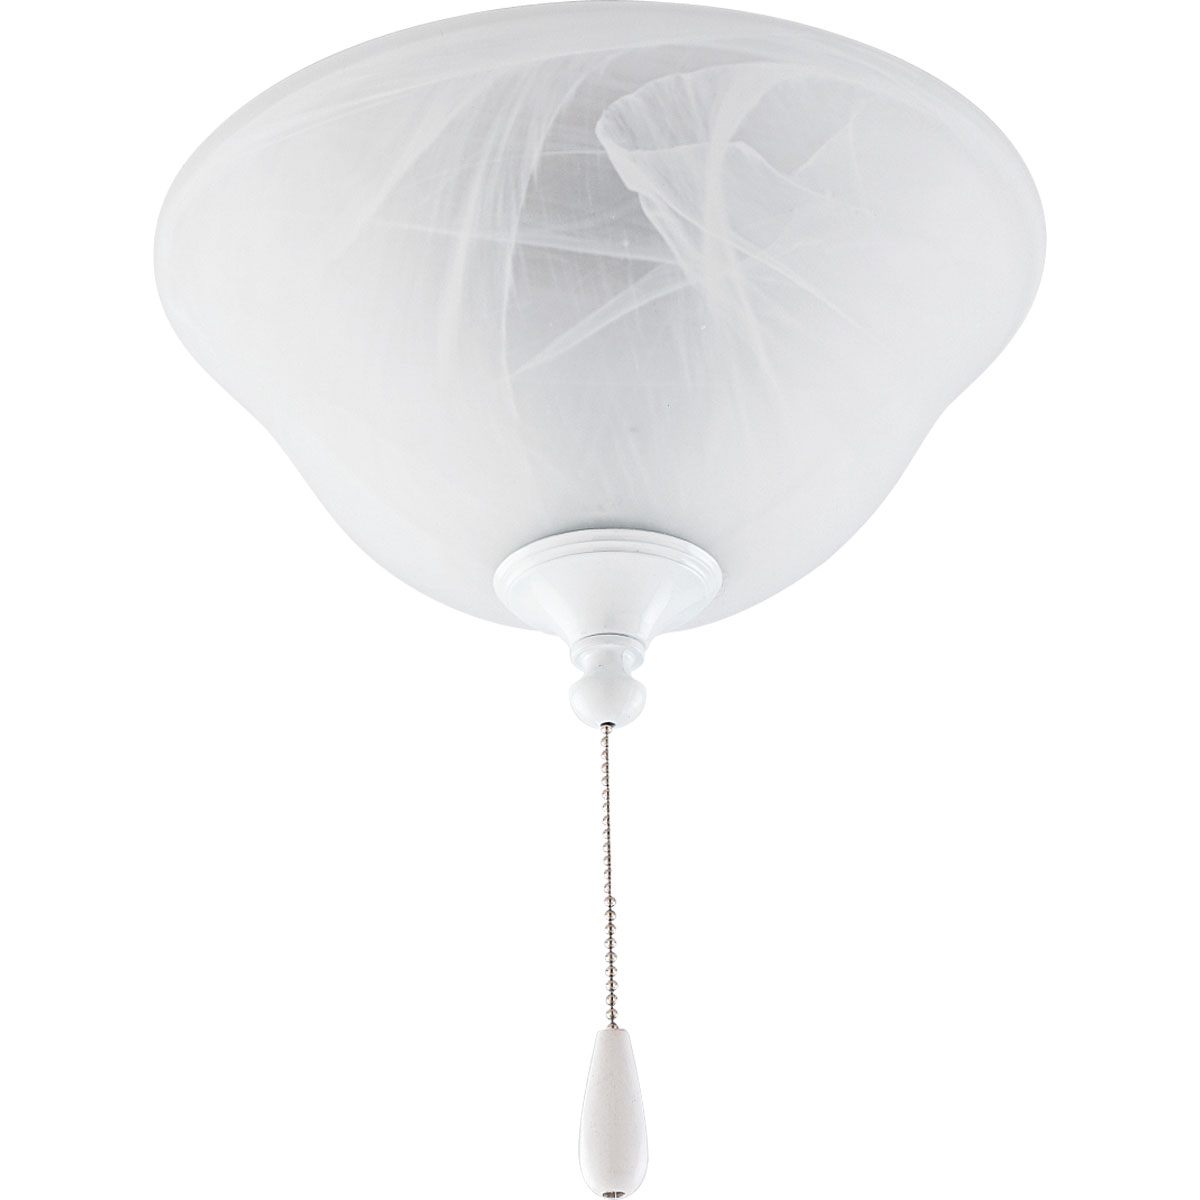 Elegant alabaster glass ceiling fan light conceals light bulbs and casts an inviting illumination in any size room. Energy saving compact fluorescent light source is a great benefit with this fixture. Corresponding pull chain features Chrome finish with a white fob. Universal style is good for fans that accept an accessory light. White finish.